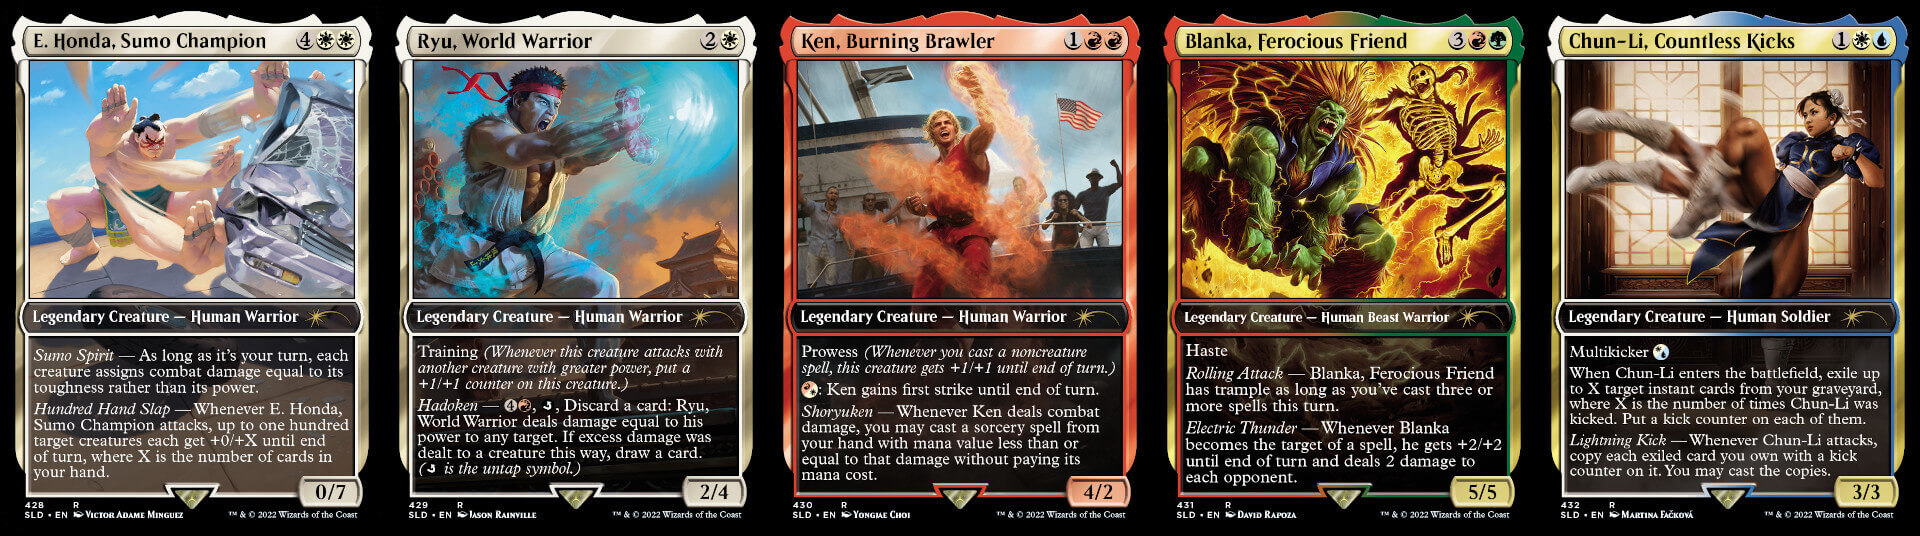 Some of the Magic: The Gathering Secret Lair x Street Fighter crossover cards